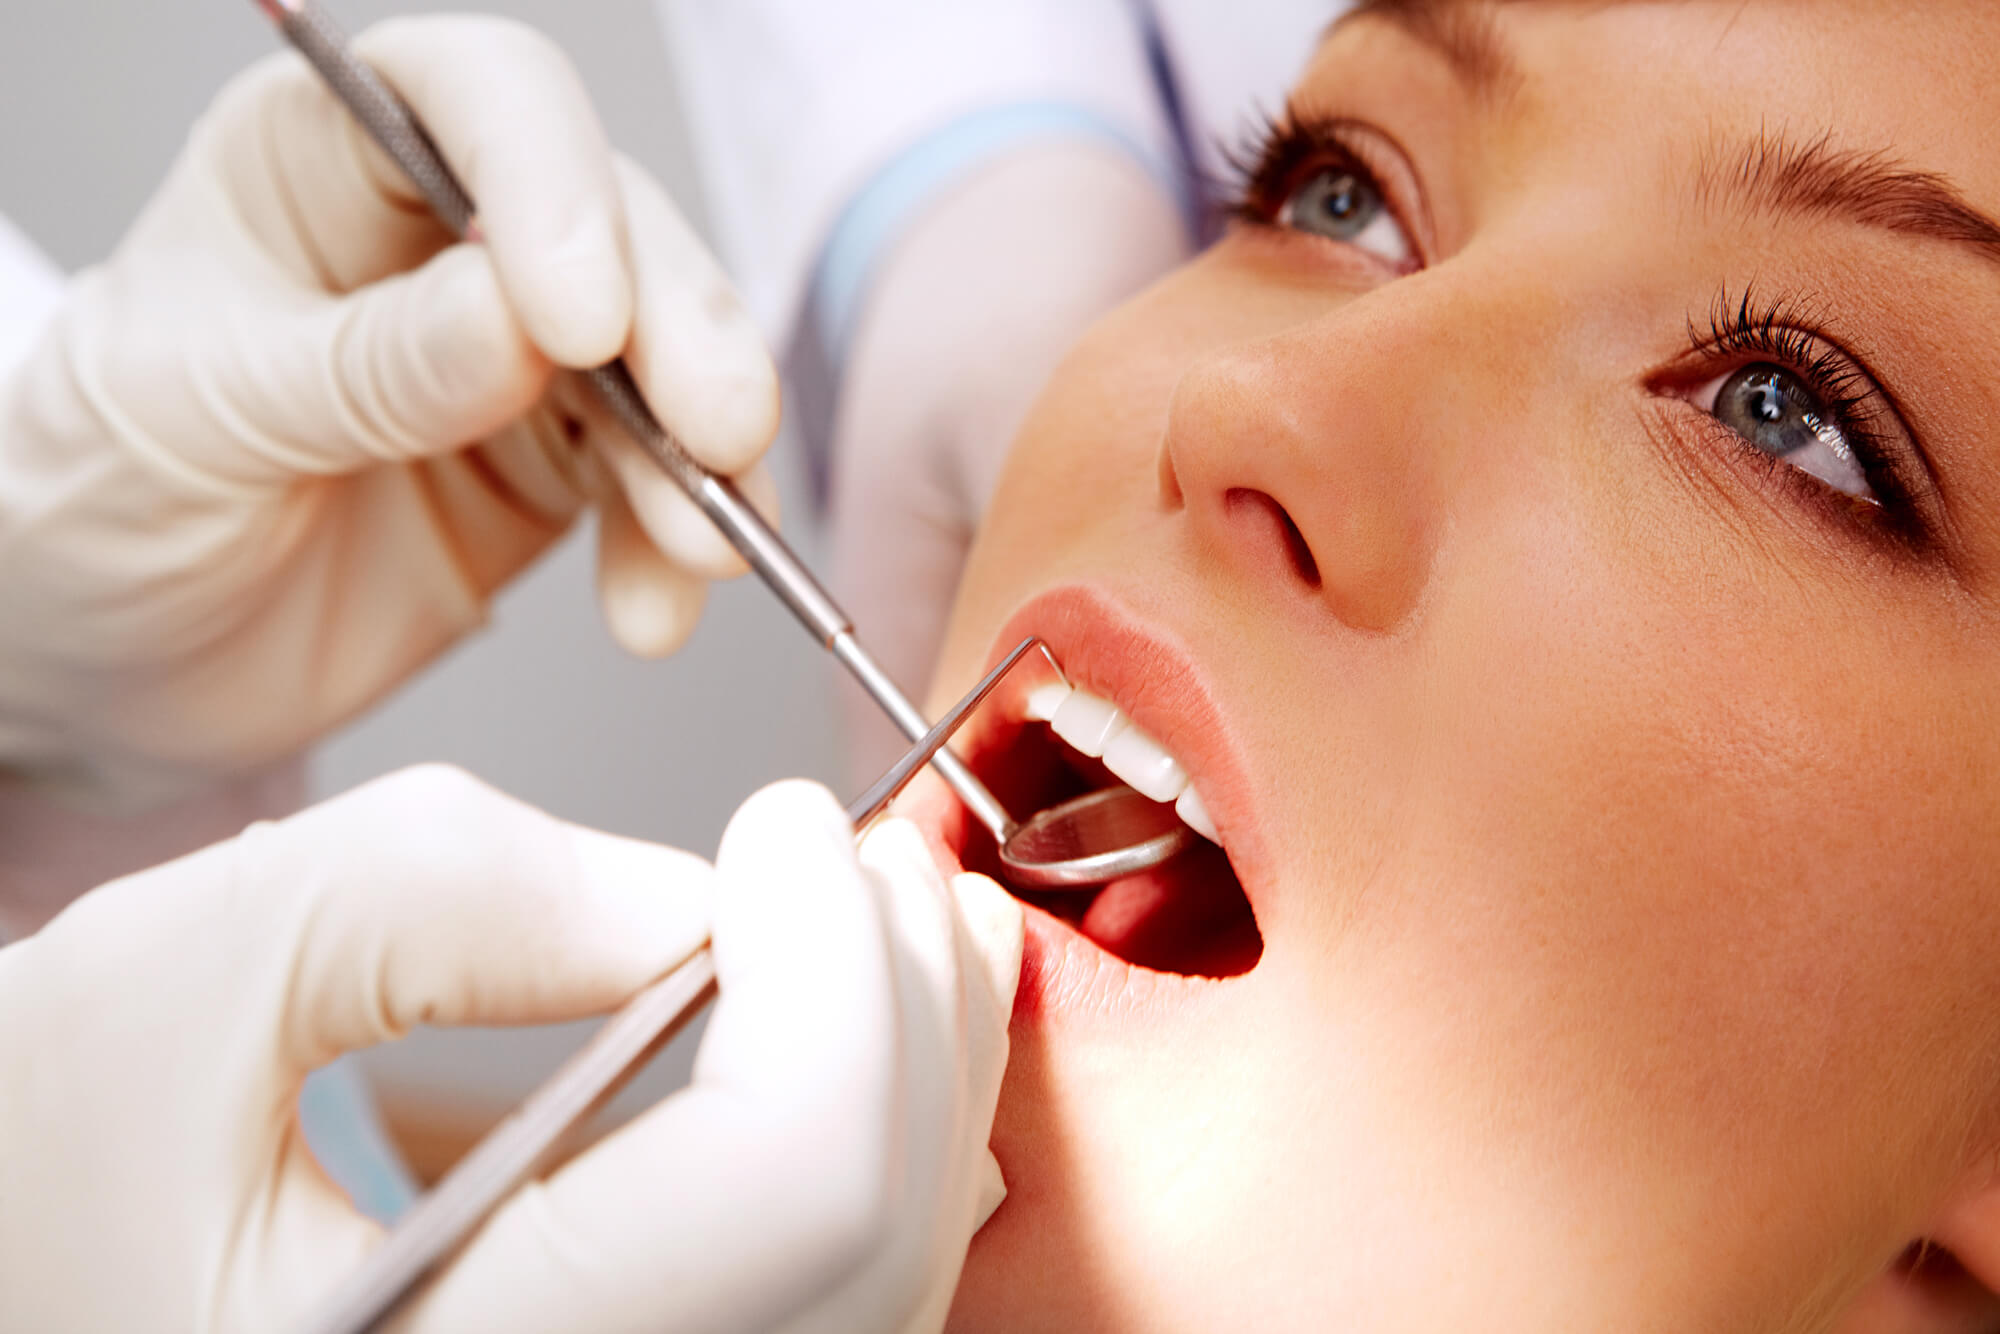 where is the best place to get sedation dentistry richmond va?